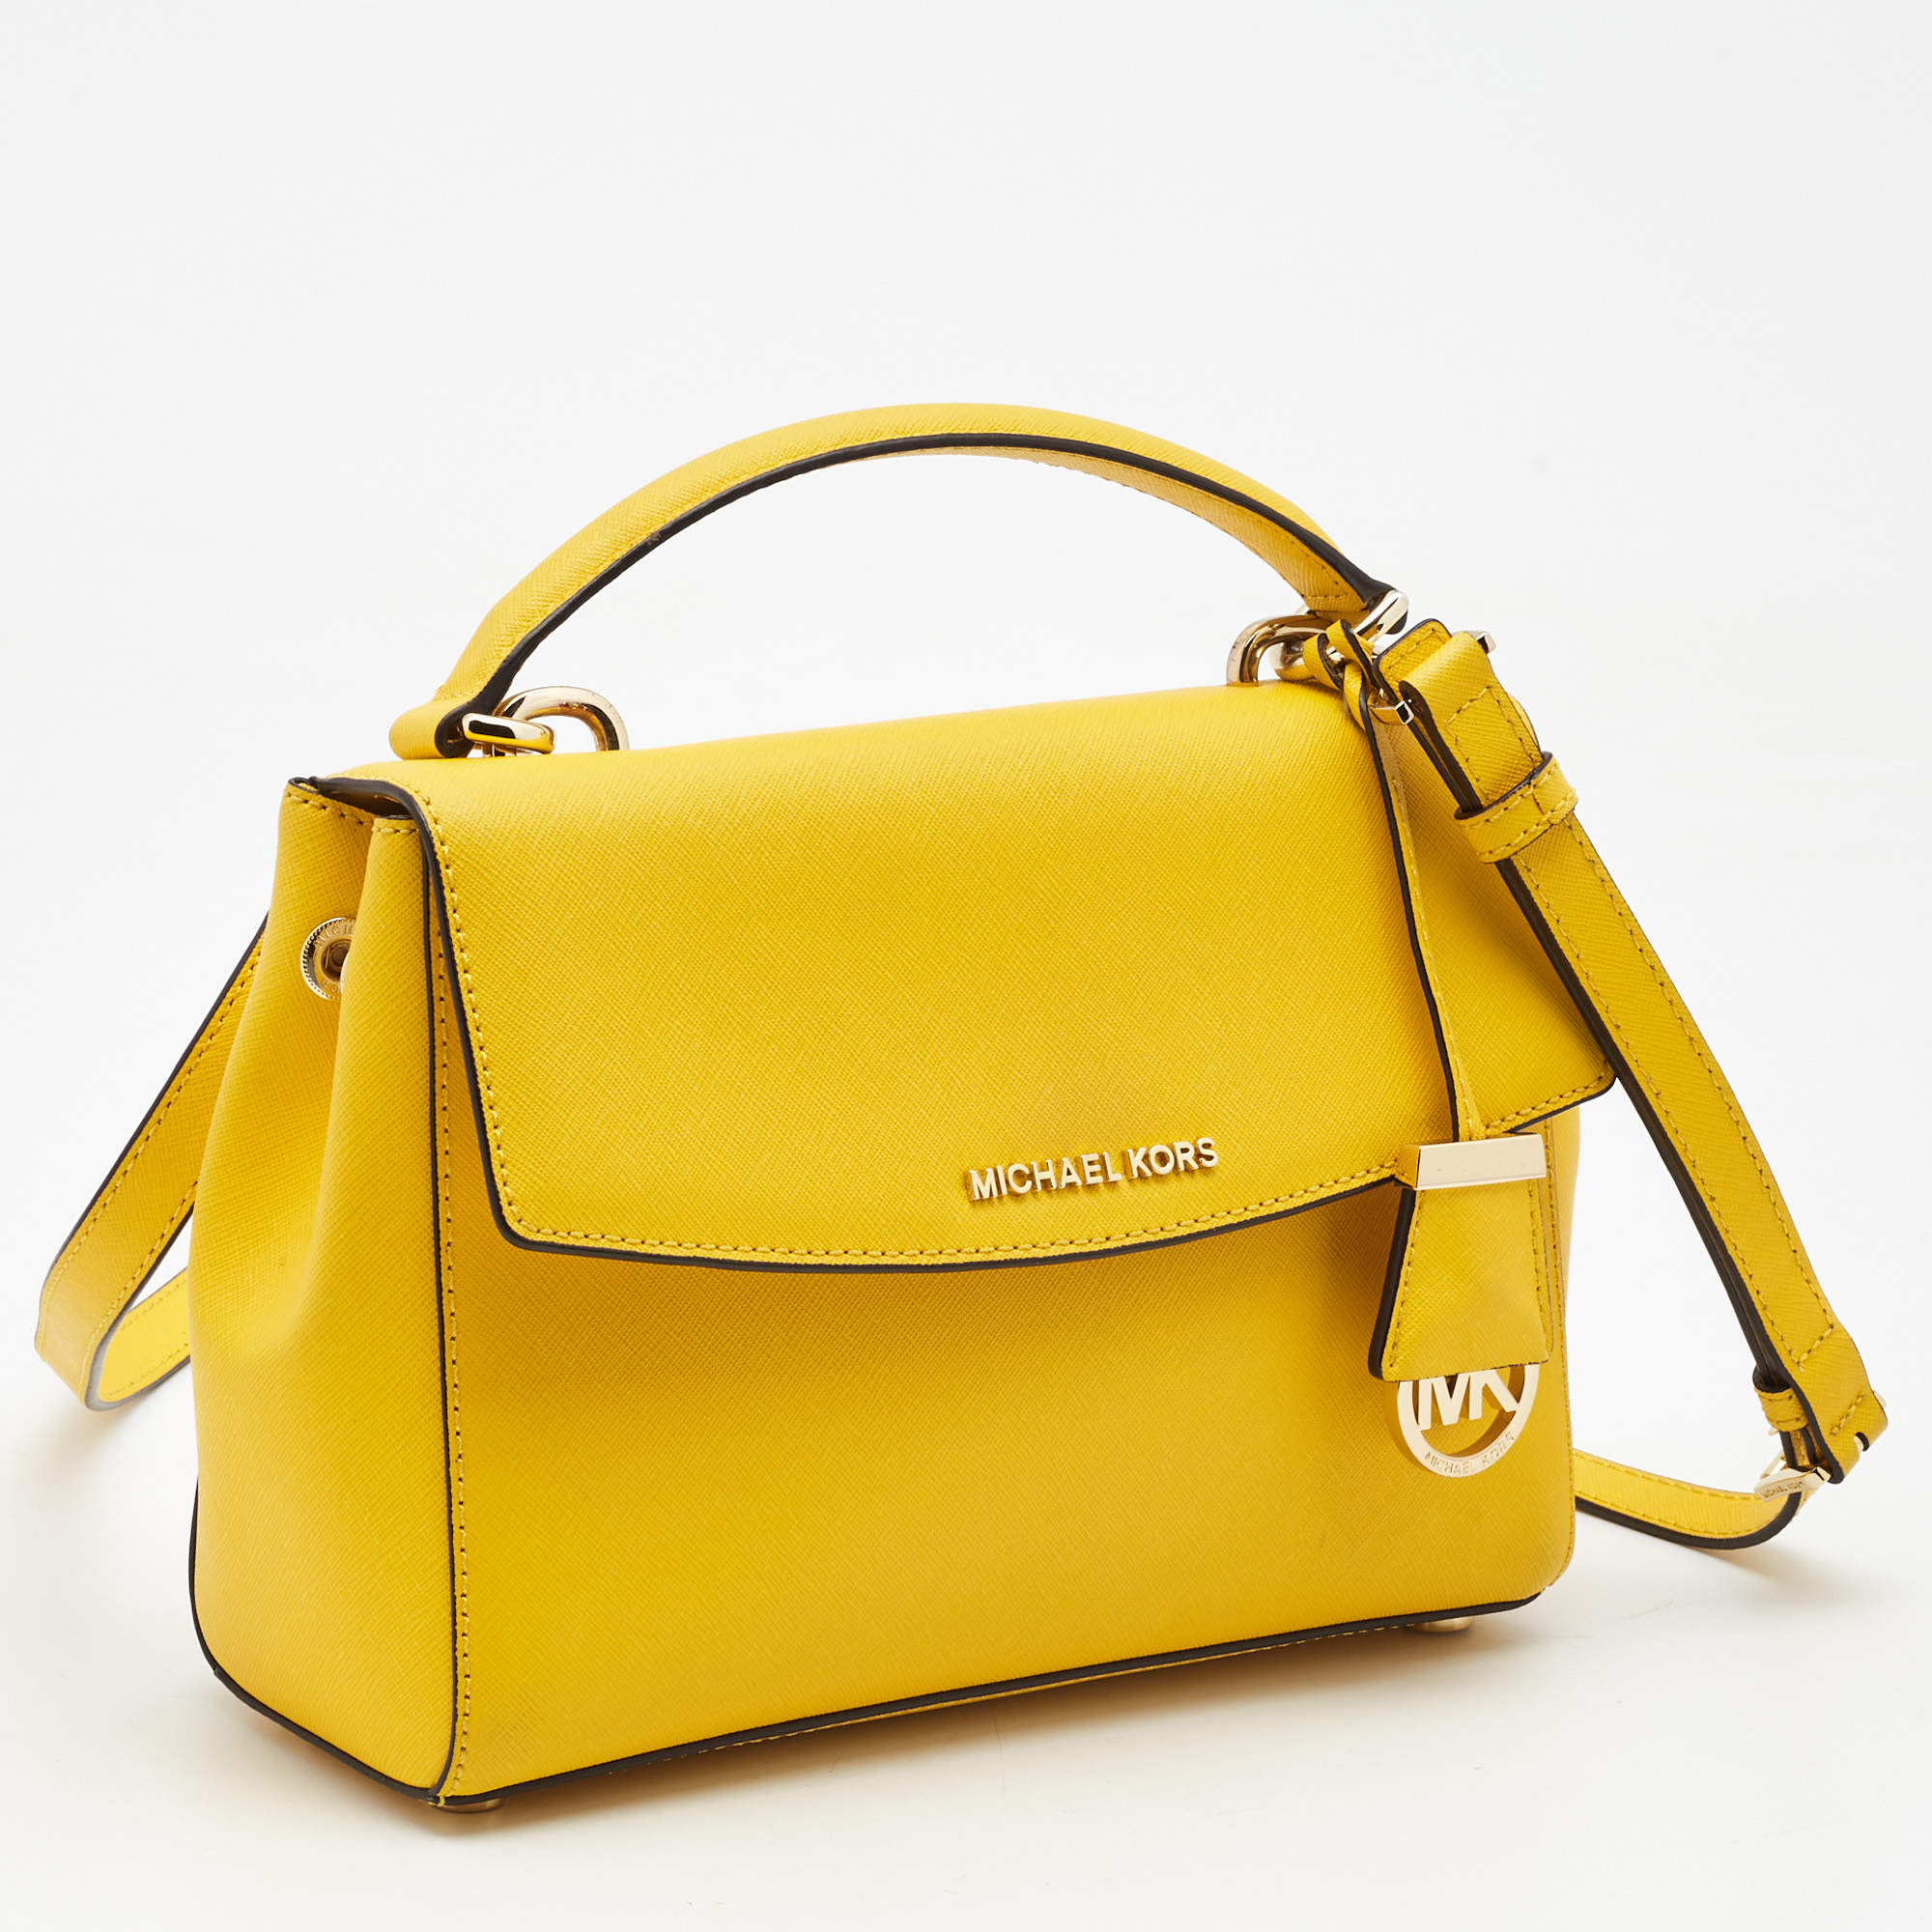 Ava leather satchel Michael Kors Yellow in Leather - 36187534